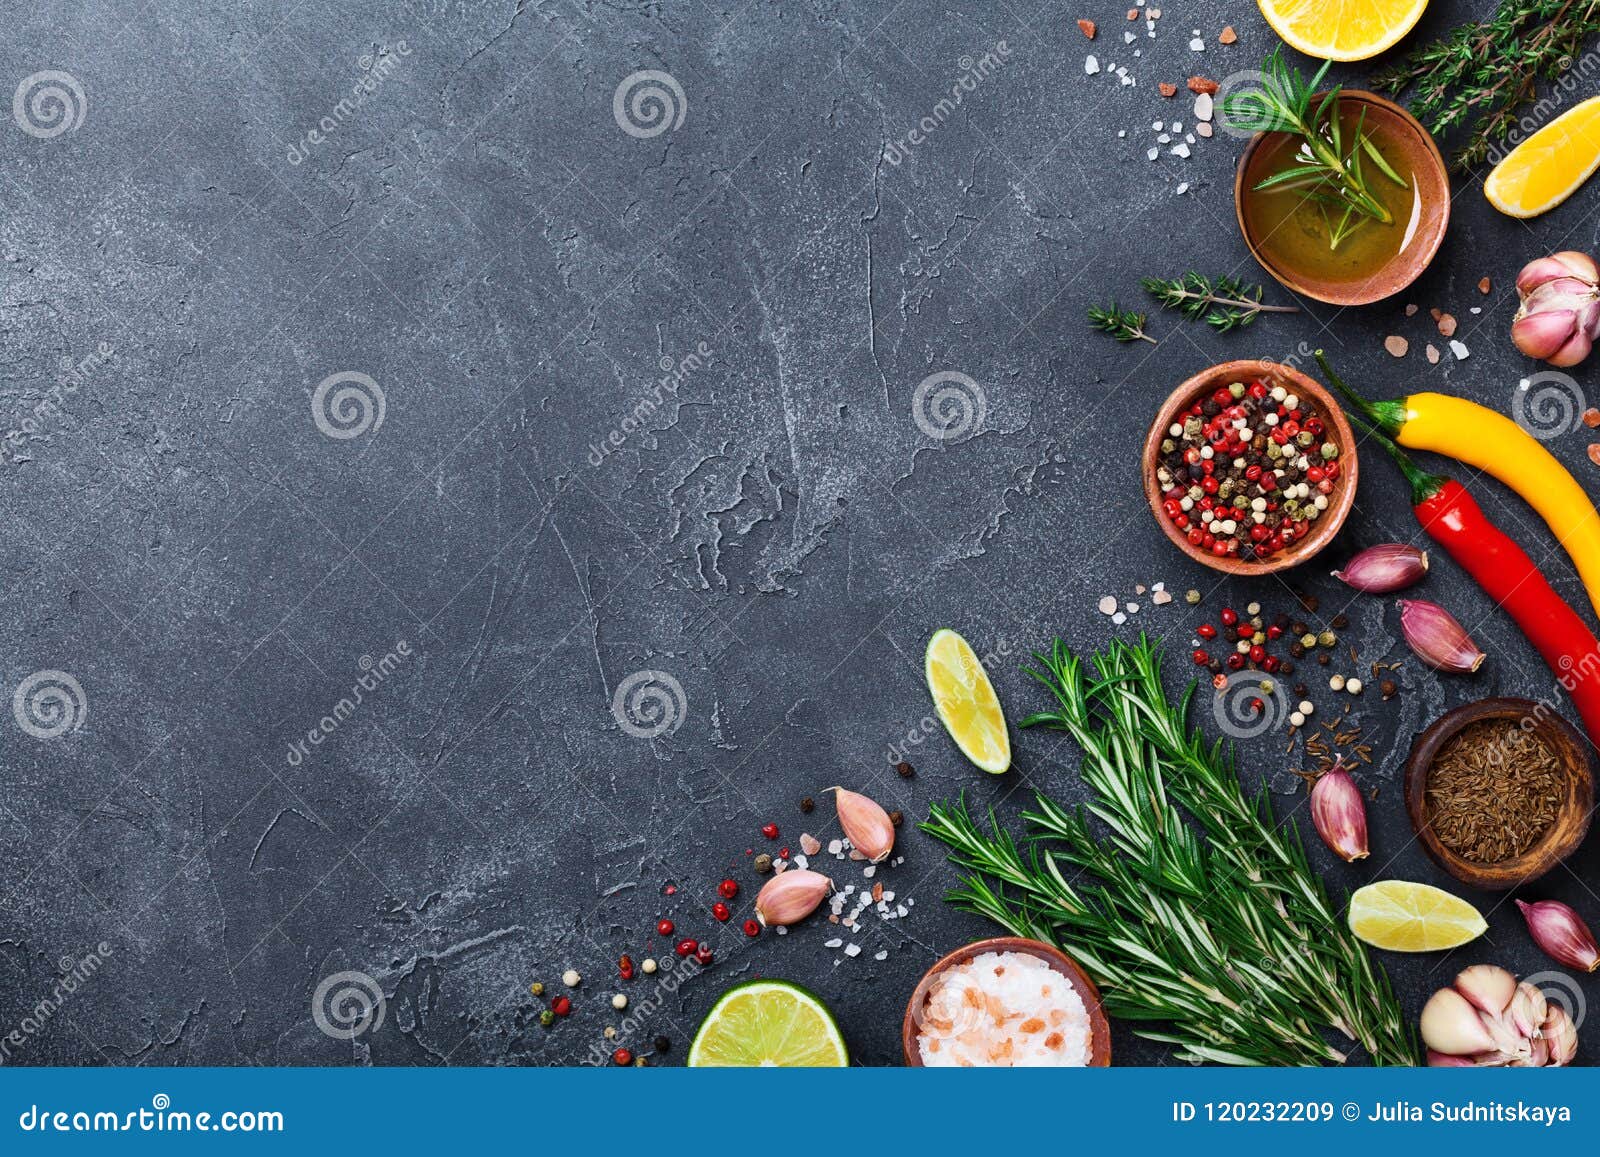 different spices and herbs on black stone table top view. ingredients for cooking. food background.